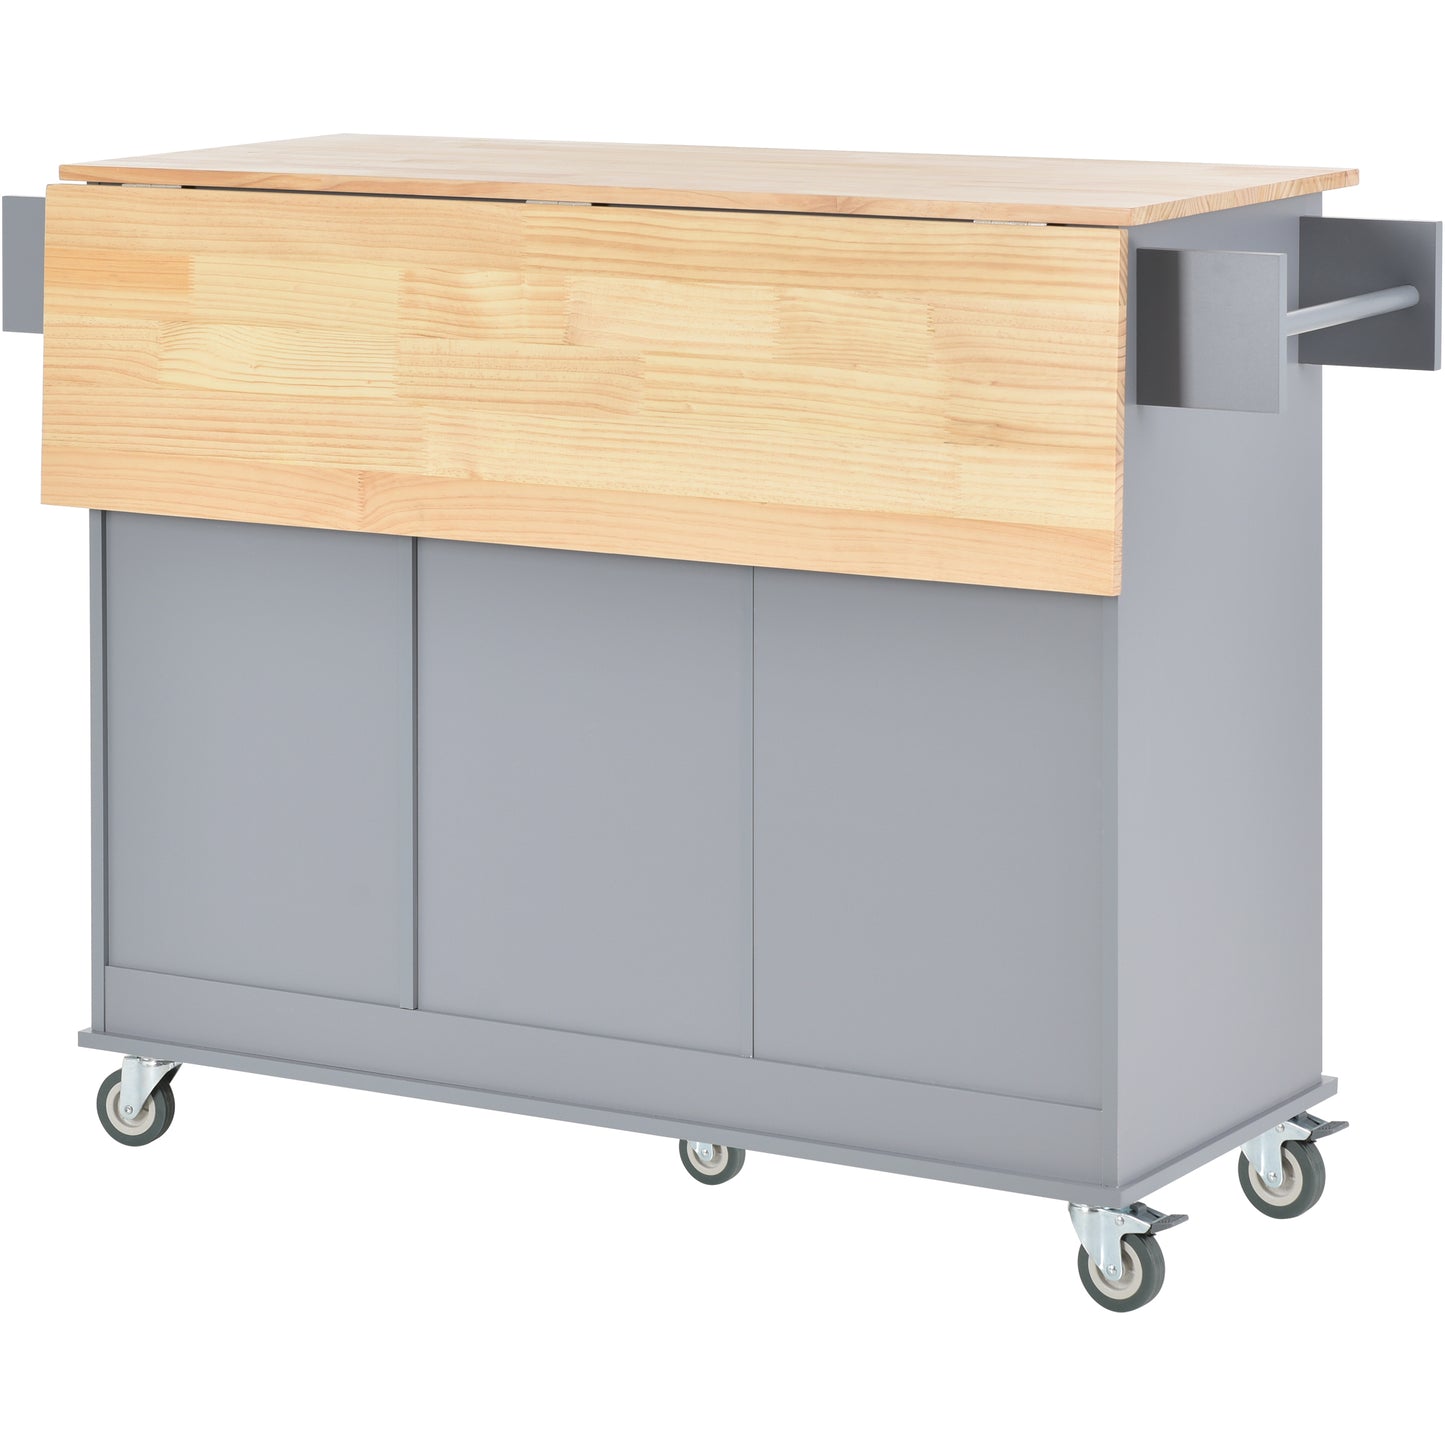 Rolling Mobile Kitchen Island with Solid Wood Top and Locking Wheels,52.7 Inch Width,Storage Cabinet and Drop Leaf Breakfast Bar,Spice Rack, Towel Rack & Drawer (Grey Blue)